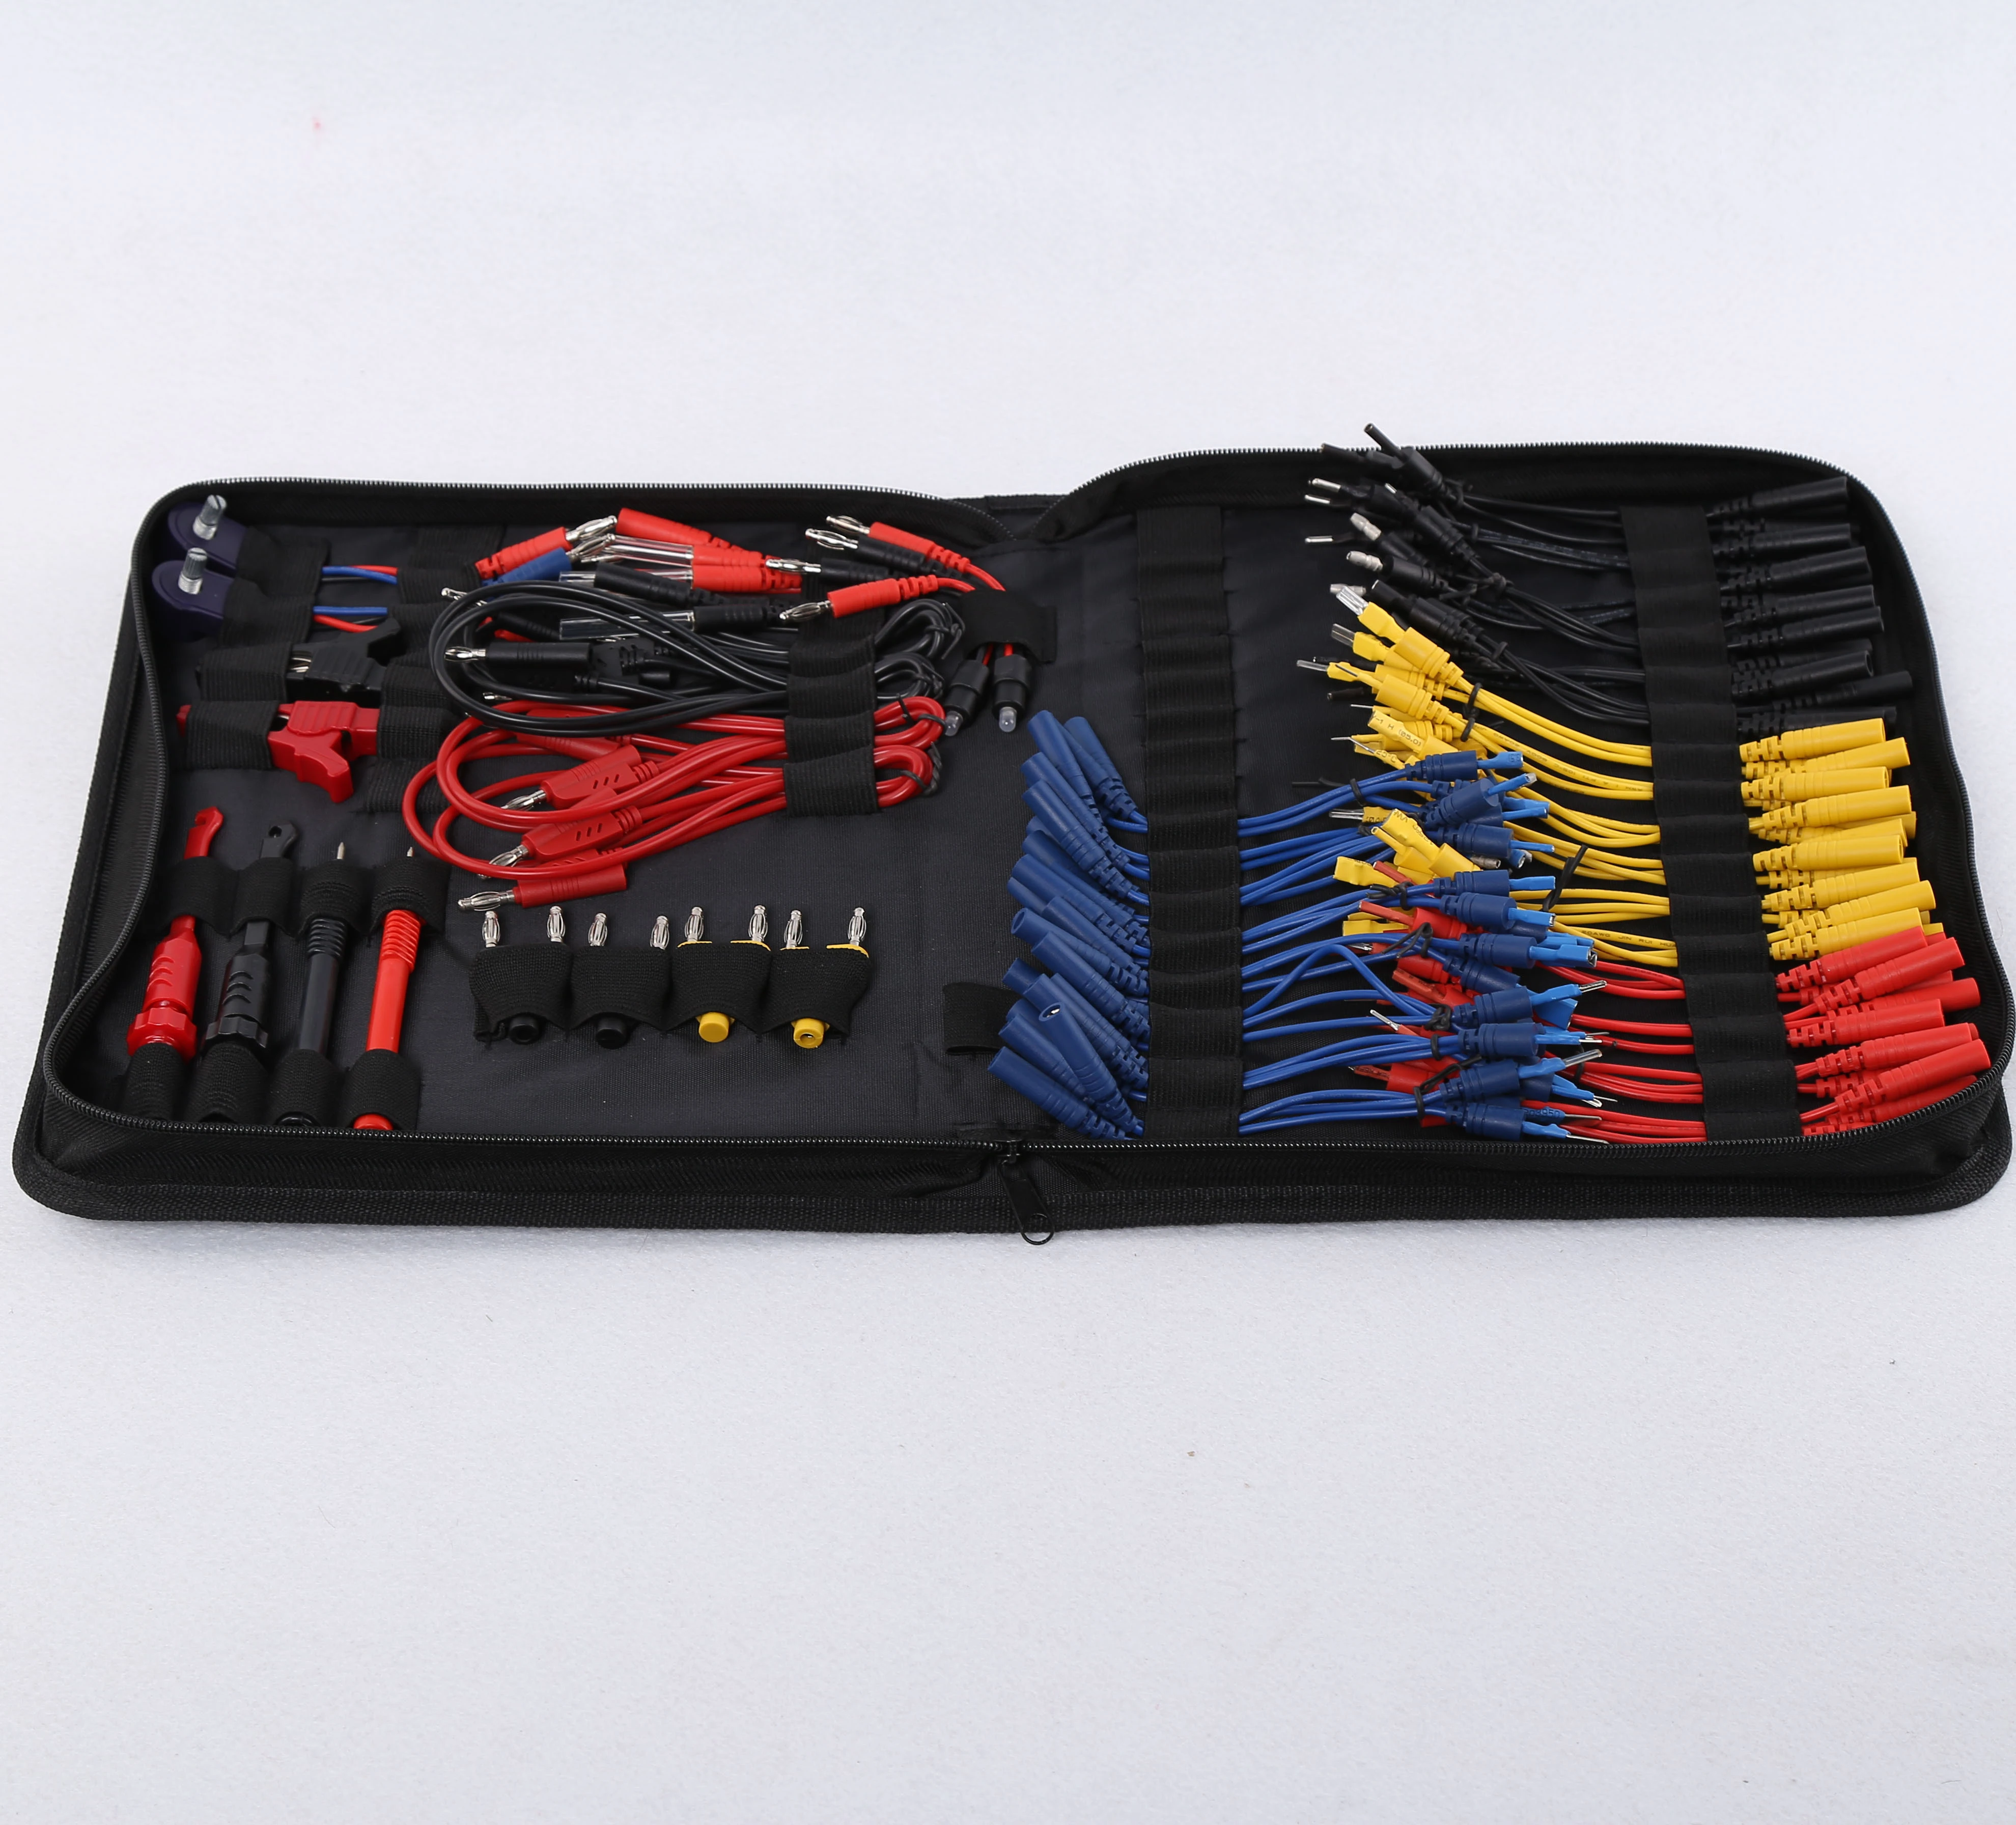 Master Auto Repair Electrical Service MST-08 Automotive Multi-function Lead Tools 94 Pieces Apply to any Automotive Multimeter